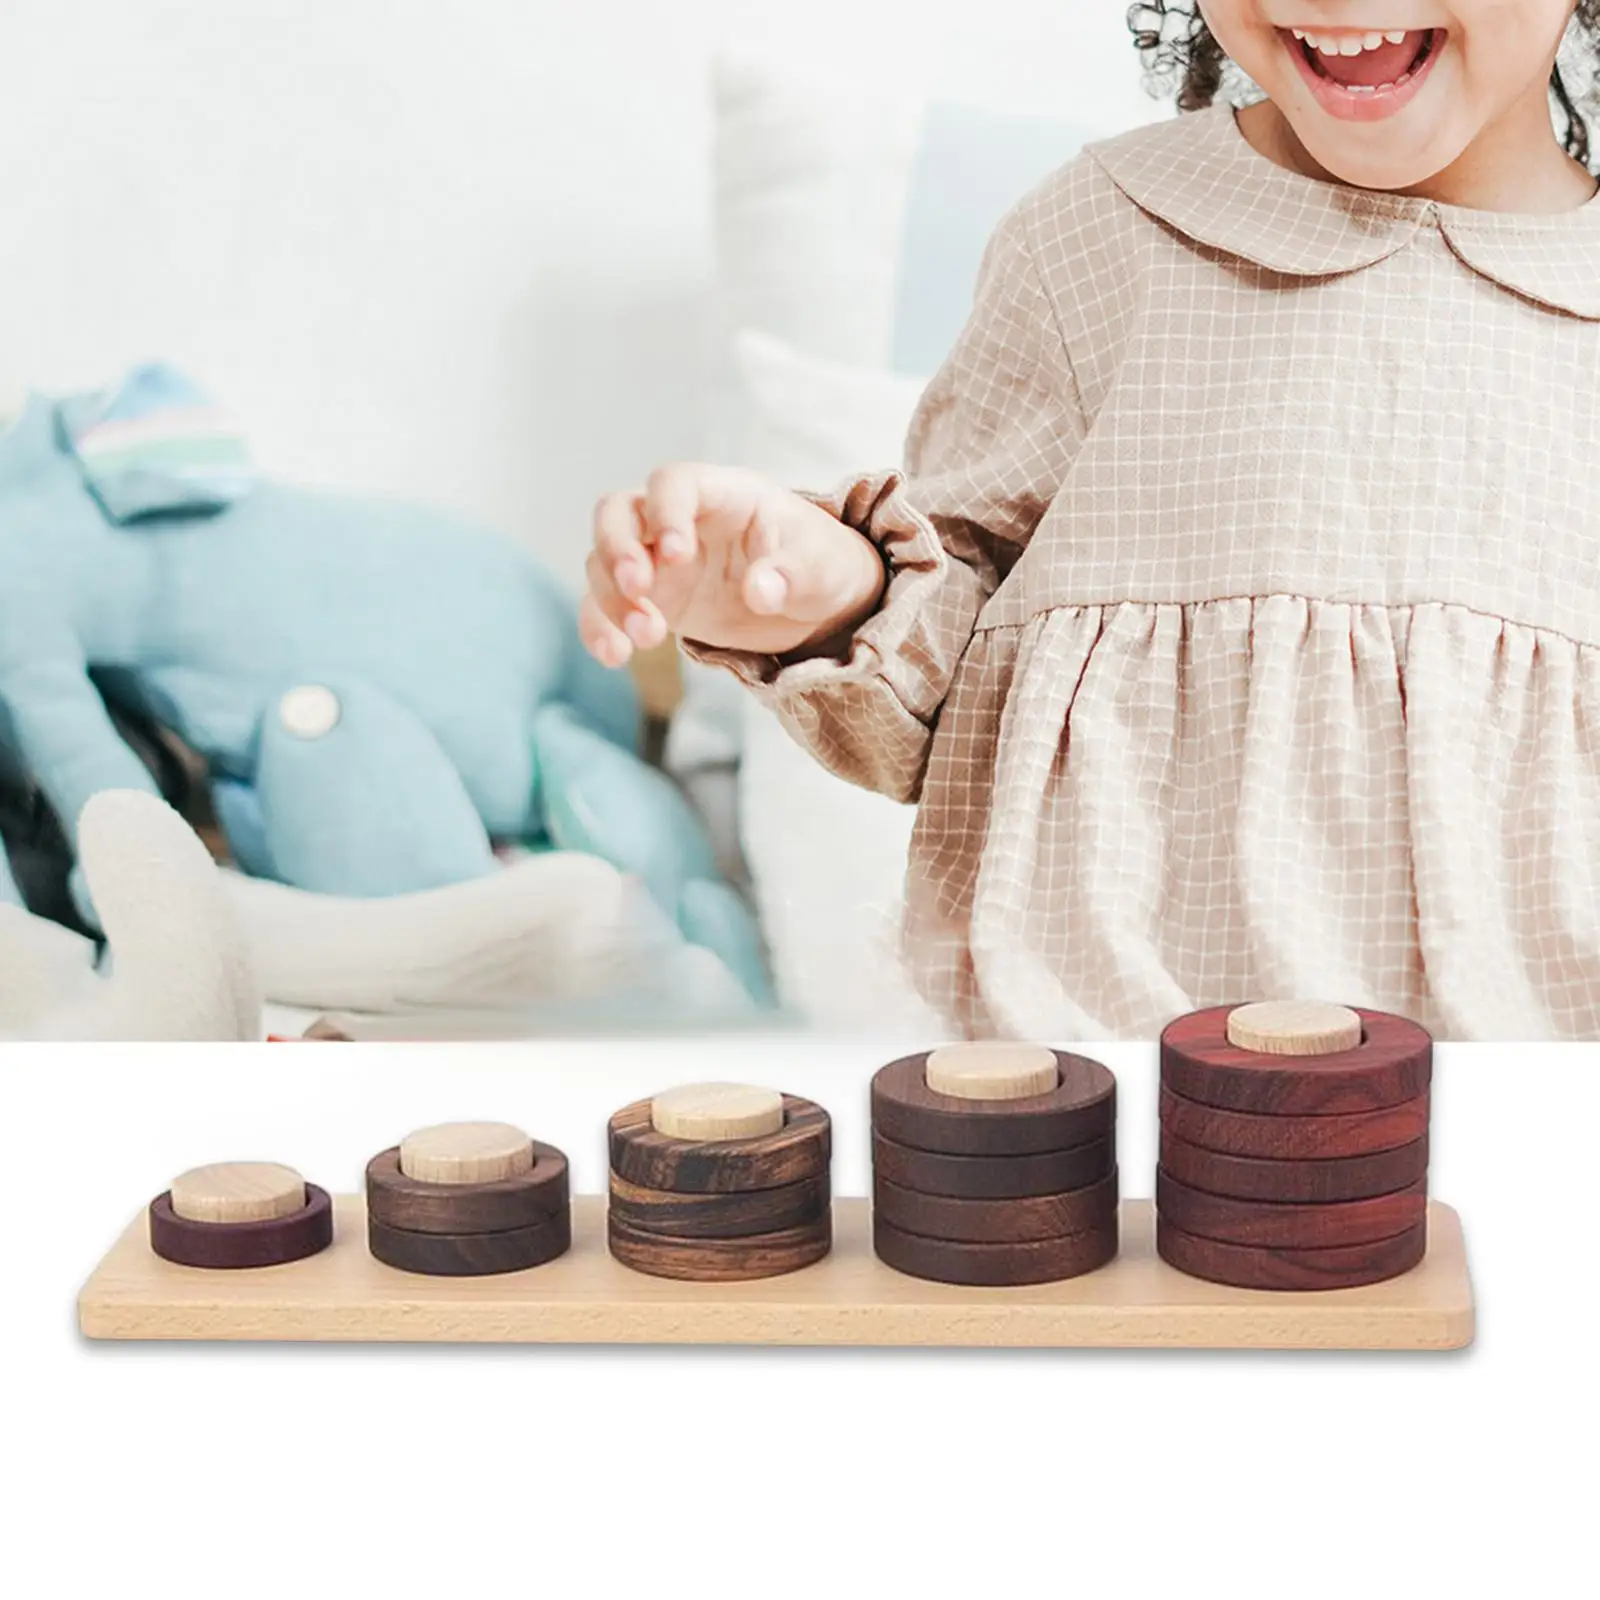 Wooden Stacking Toys Sensory Toys Educational Learning Toy Intelligence Toy for Kids Children Toddlers Girls Boy Birthday Gifts